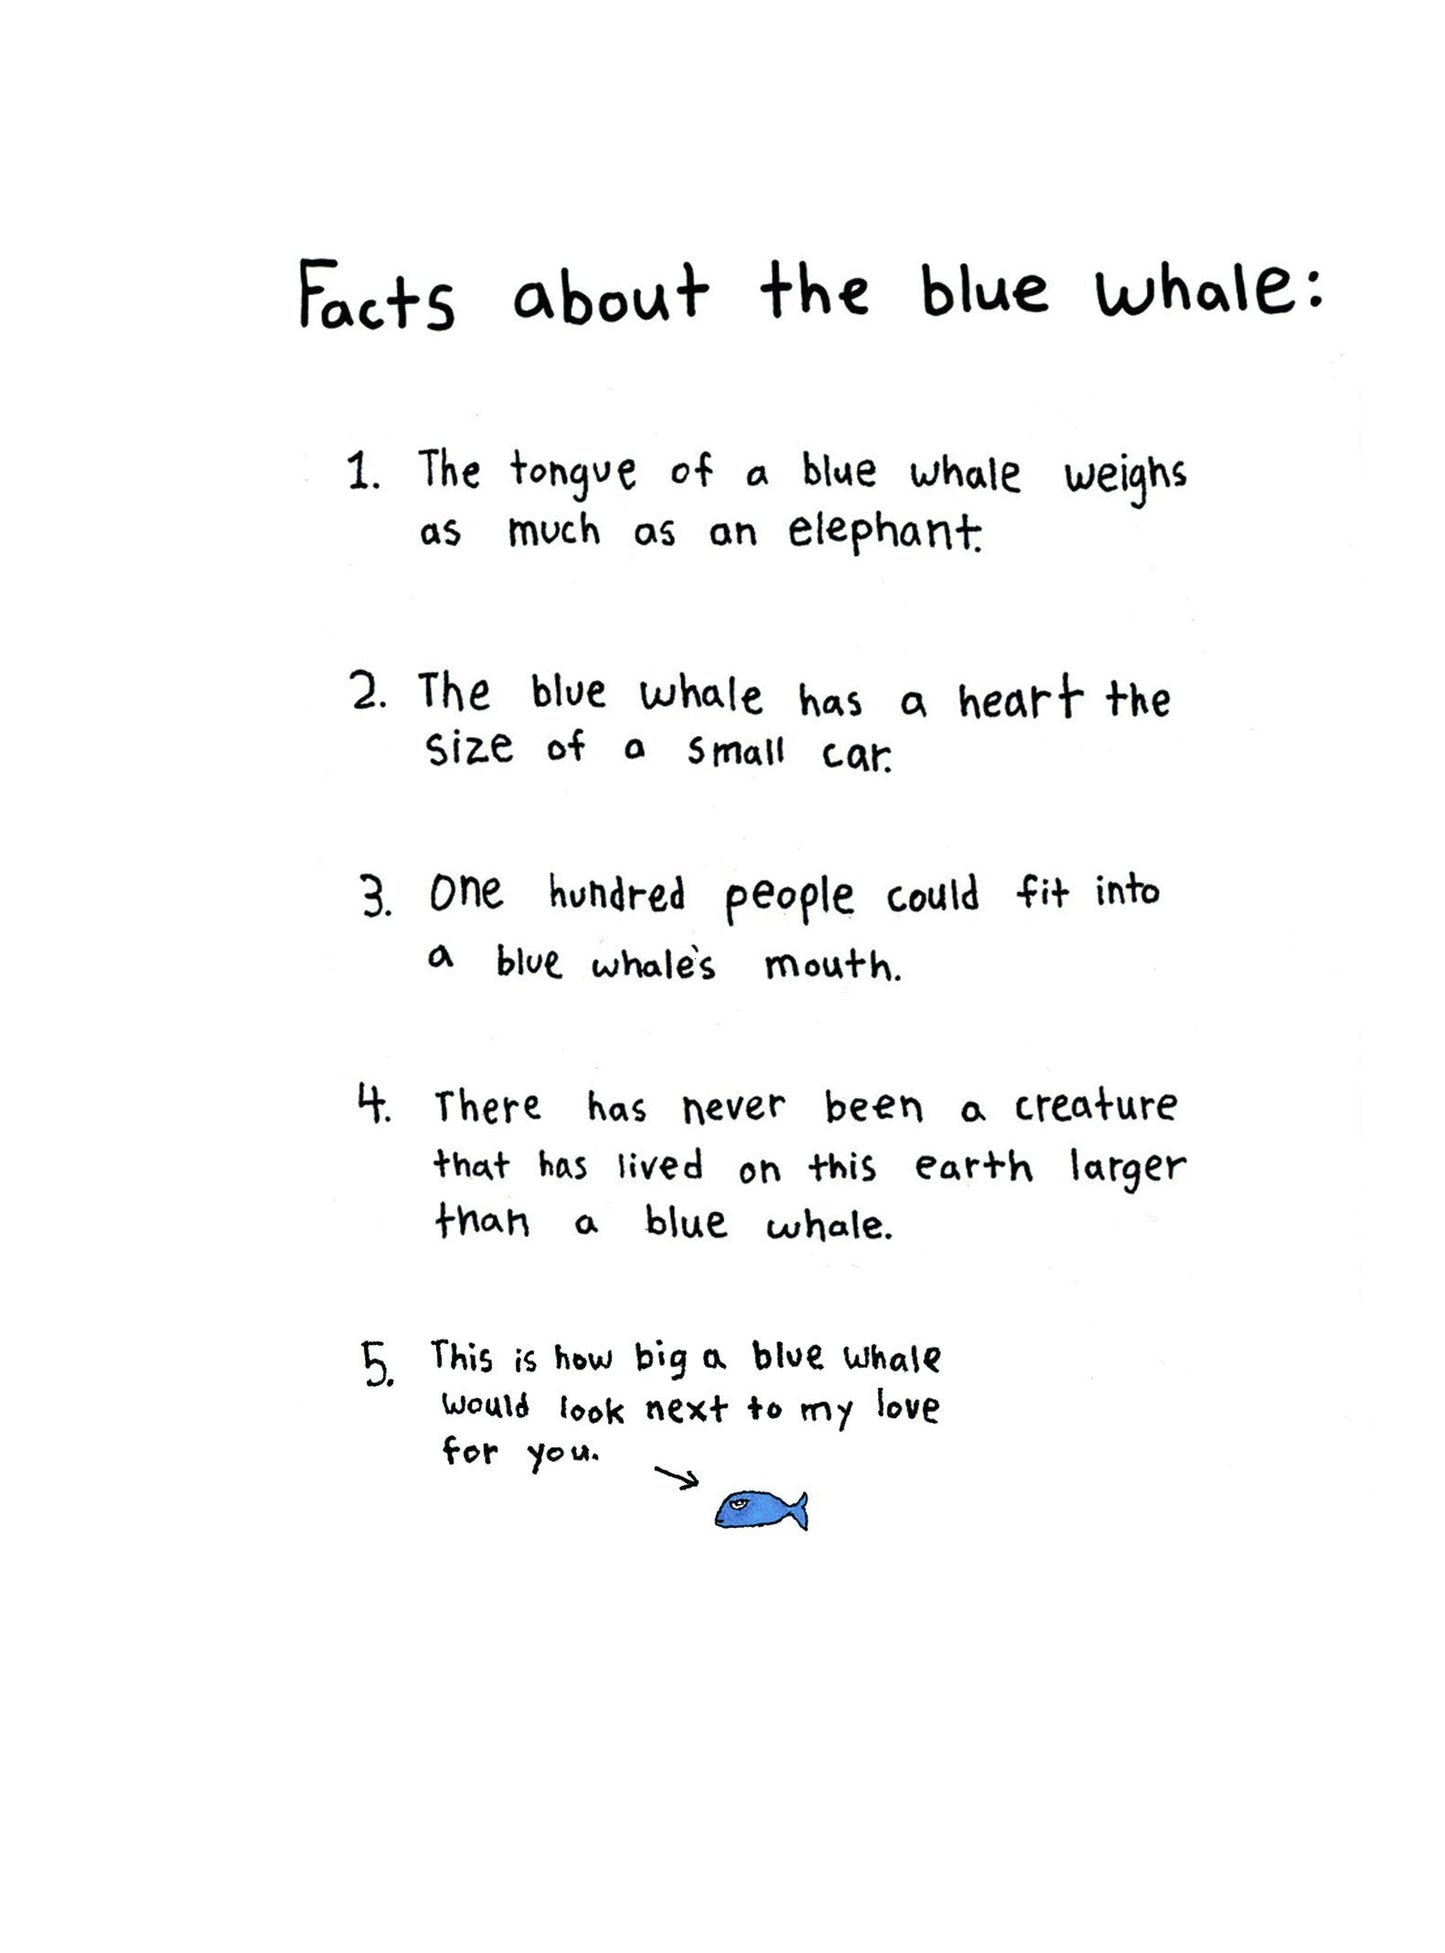 Facts About a Blue Whale Card